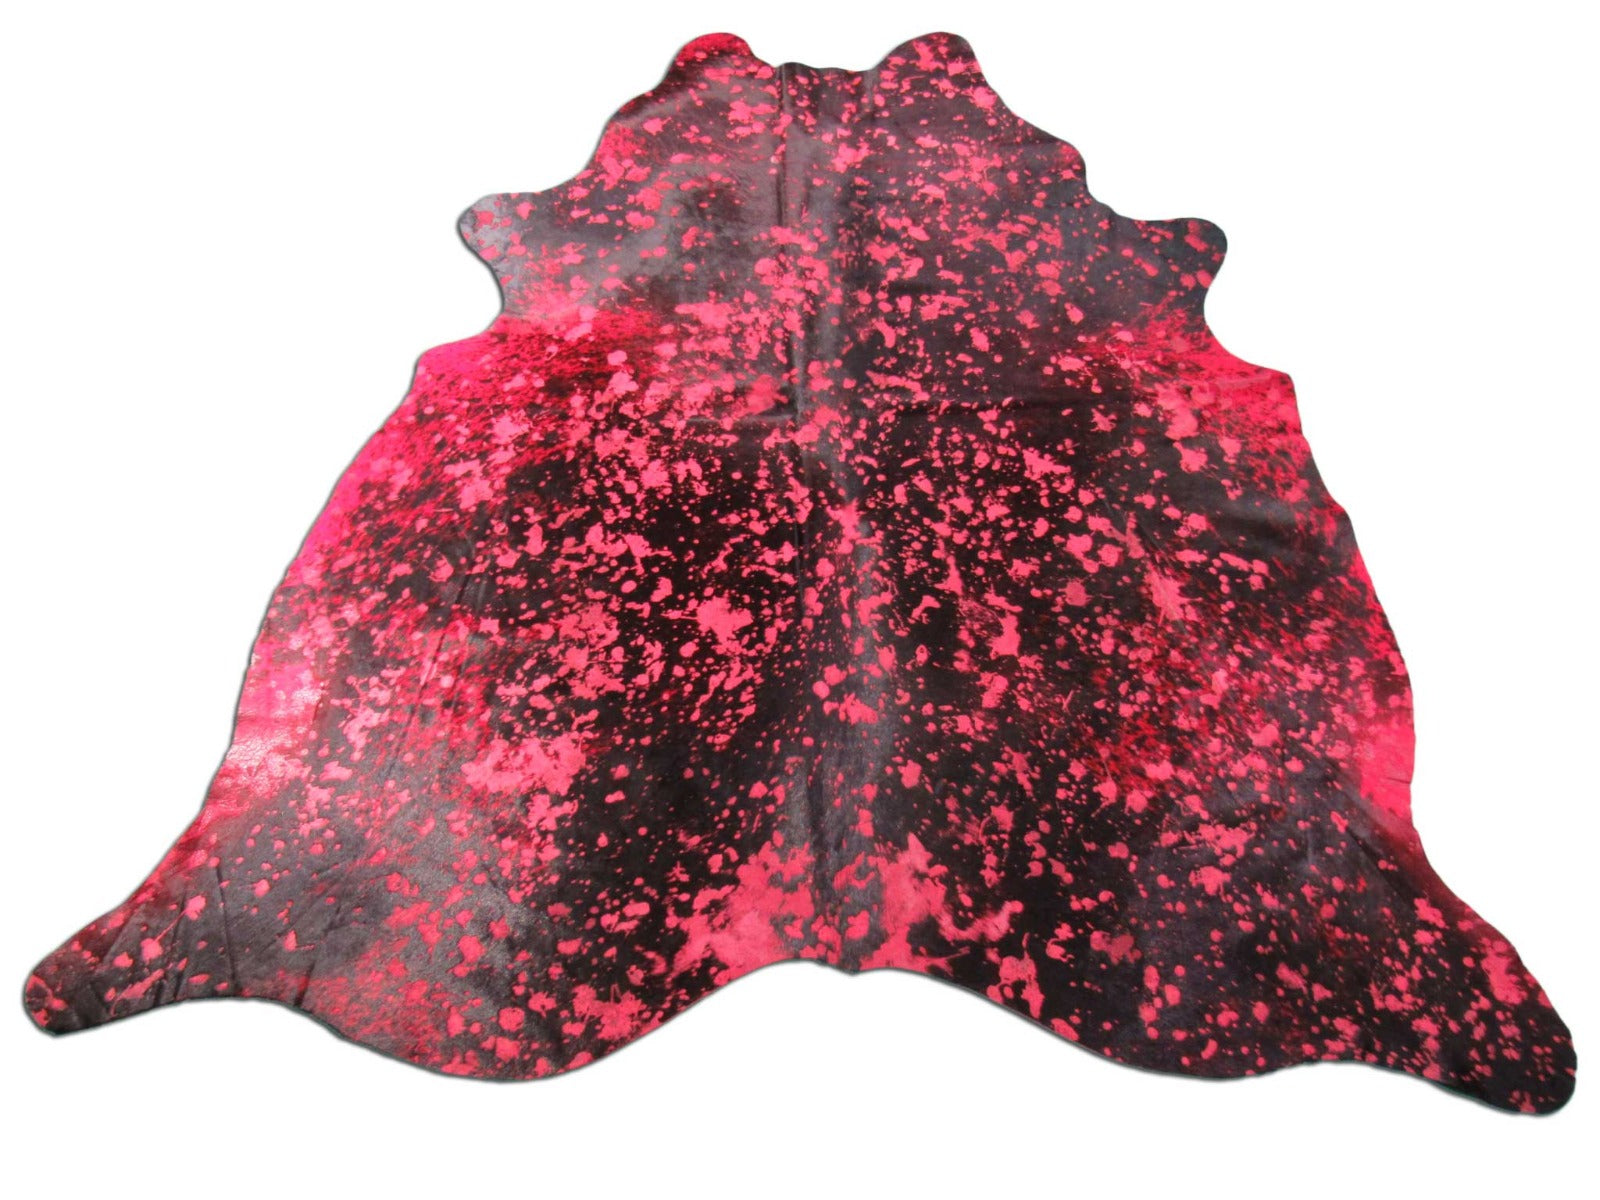 Dyed Red with Acid Wash Devore Cowhide Rug - Size: 7x7 feet M-1025